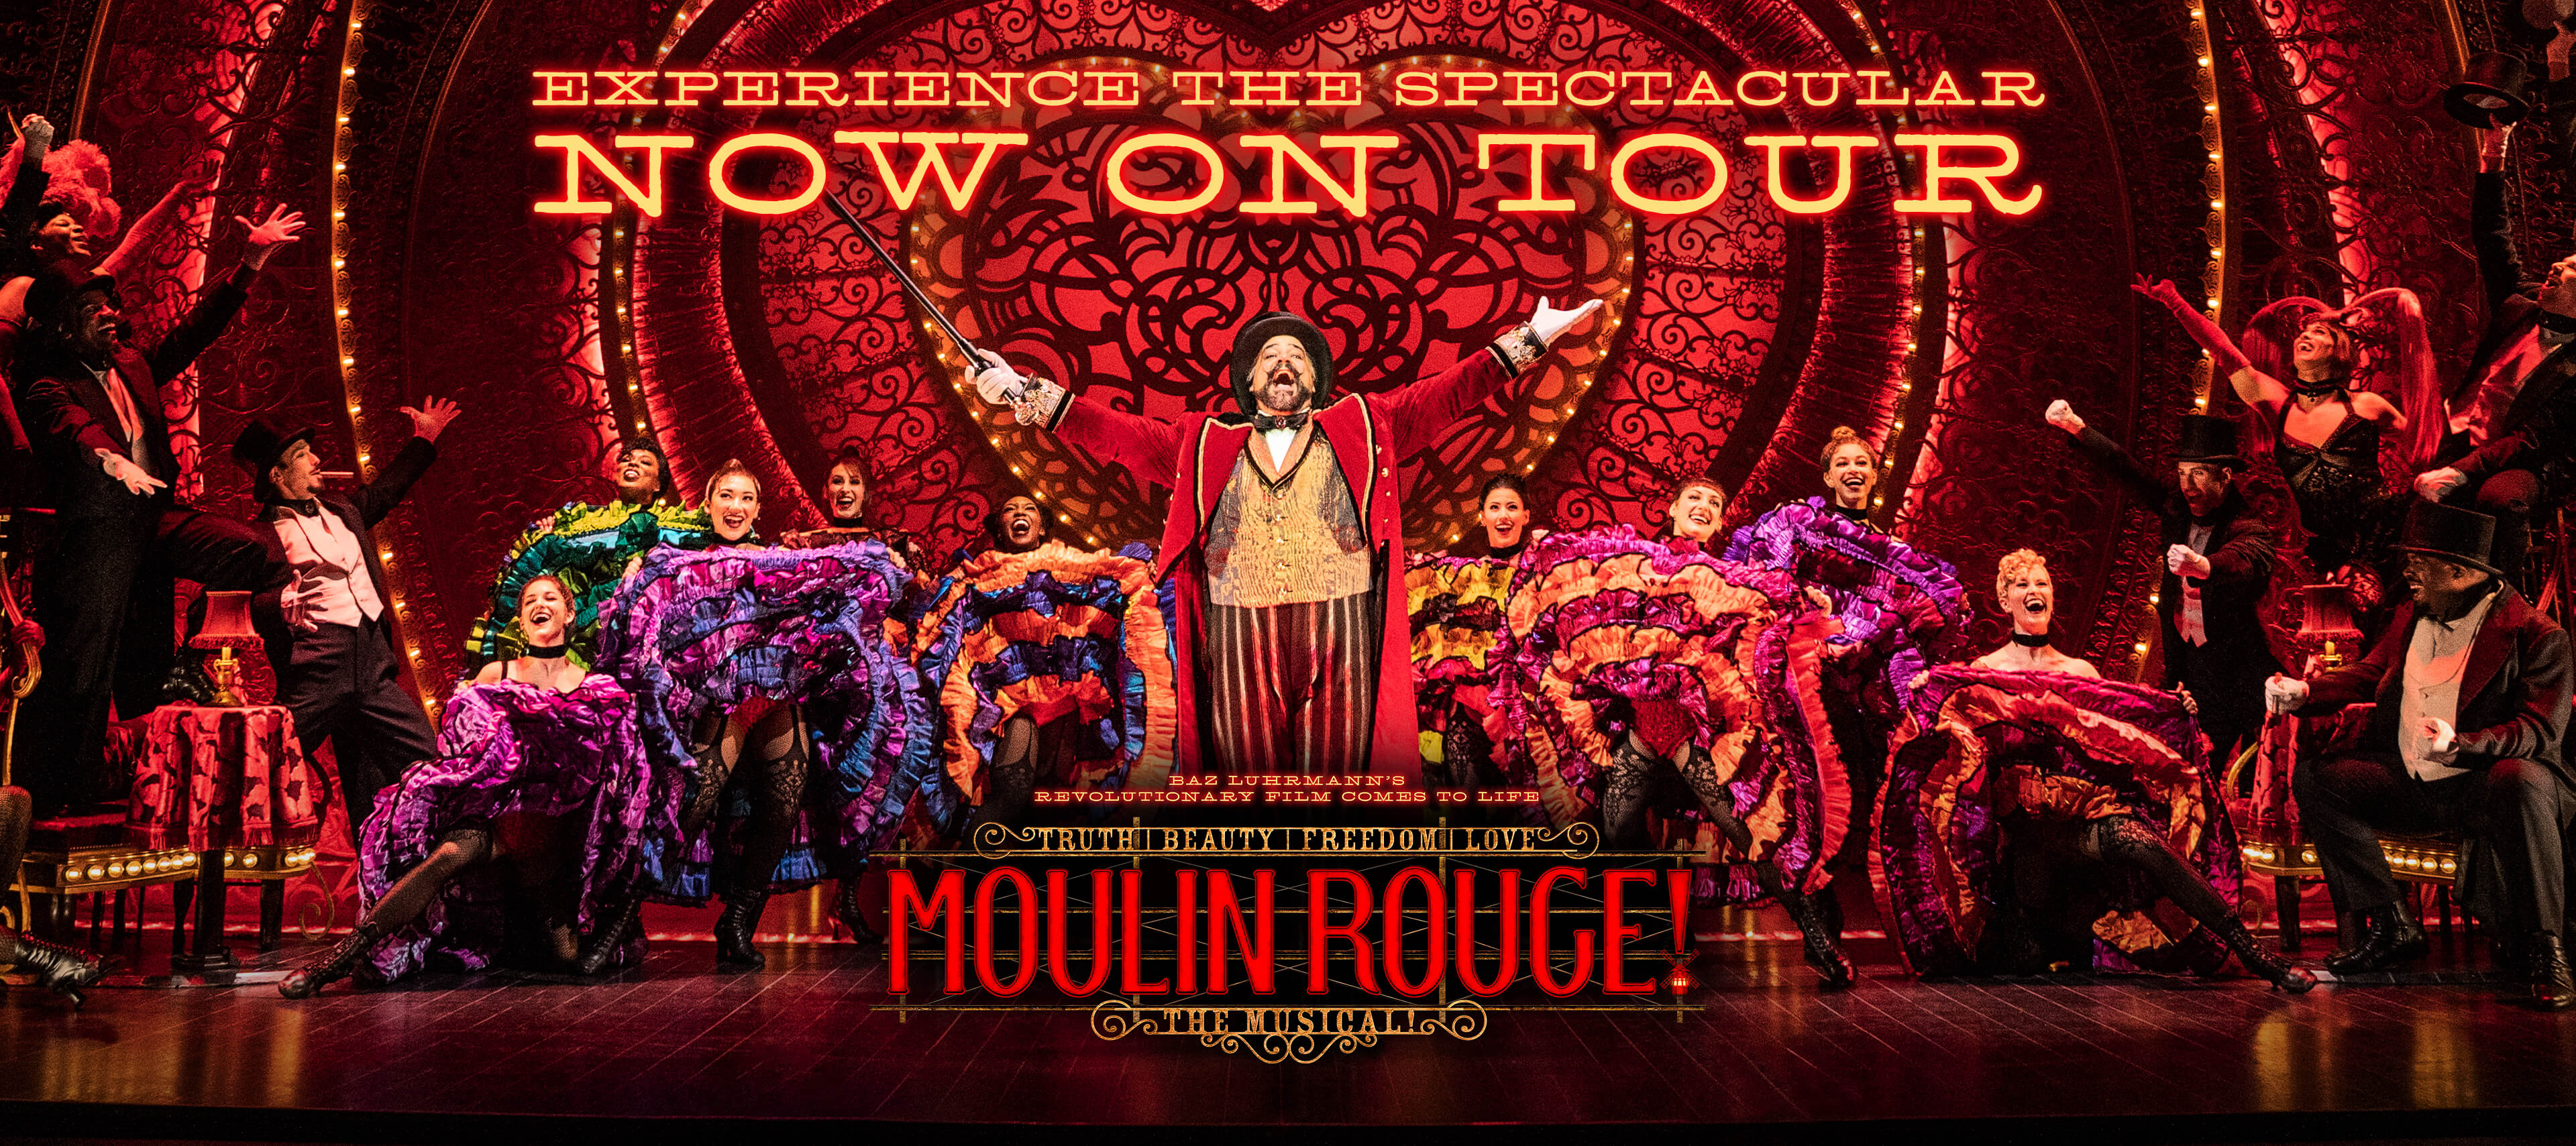 Moulin Rouge The Musical 14 Tony Award Nominations!